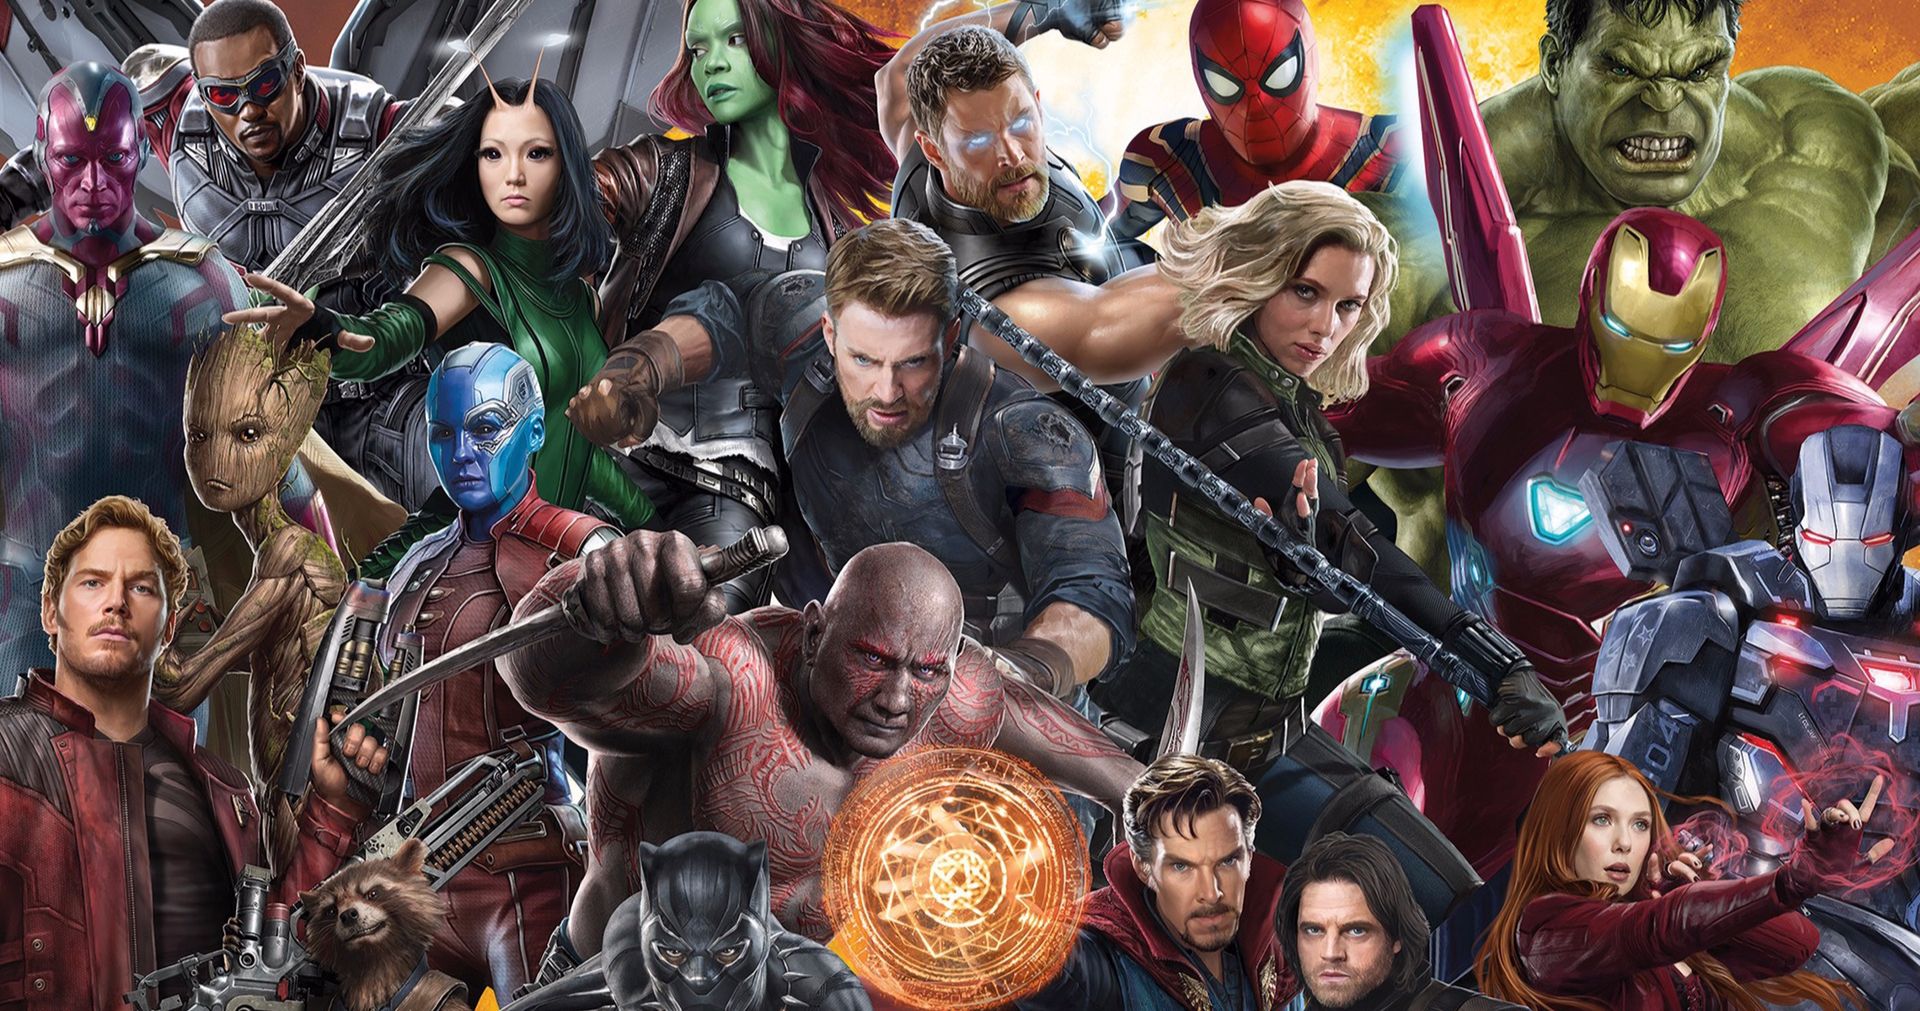 Marvel Studios Will Return to Hall H at Comic-Con, So What Are They Bringing?